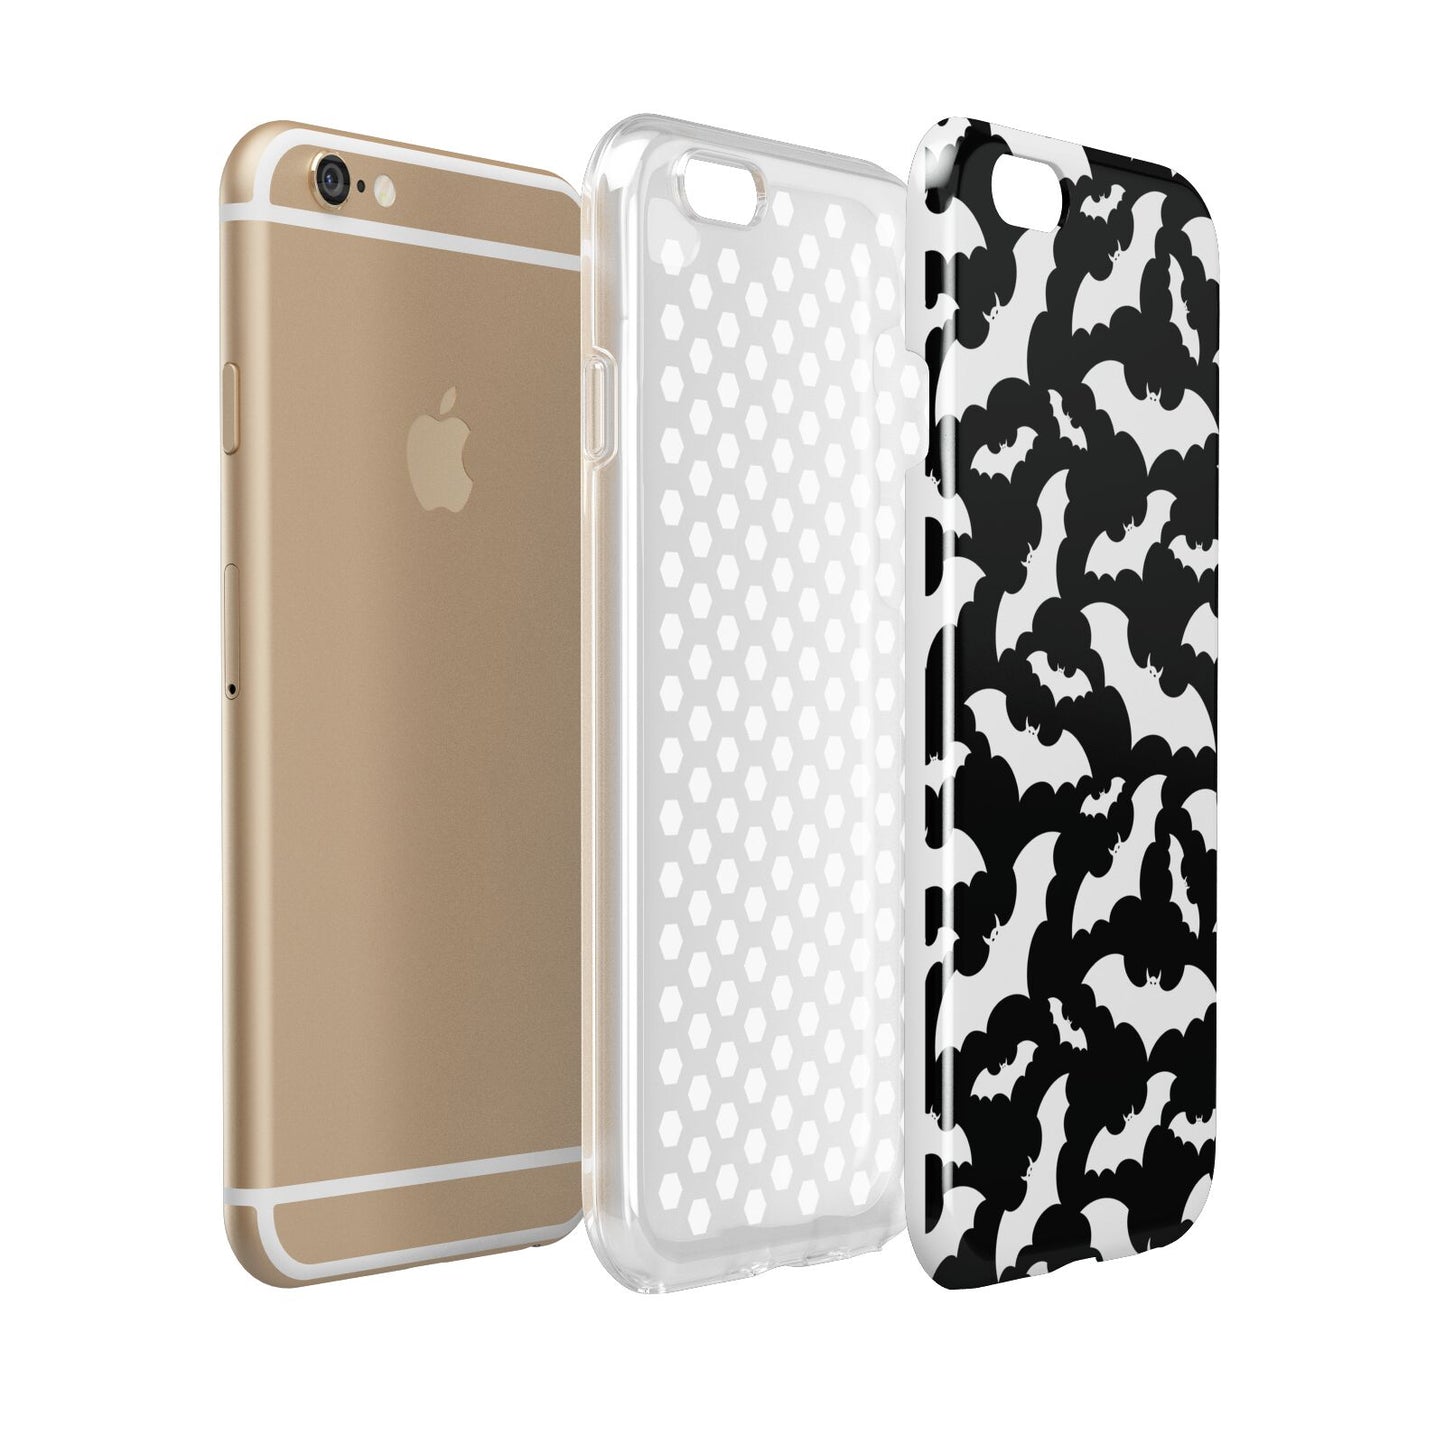 Black and White Bats Apple iPhone 6 3D Tough Case Expanded view